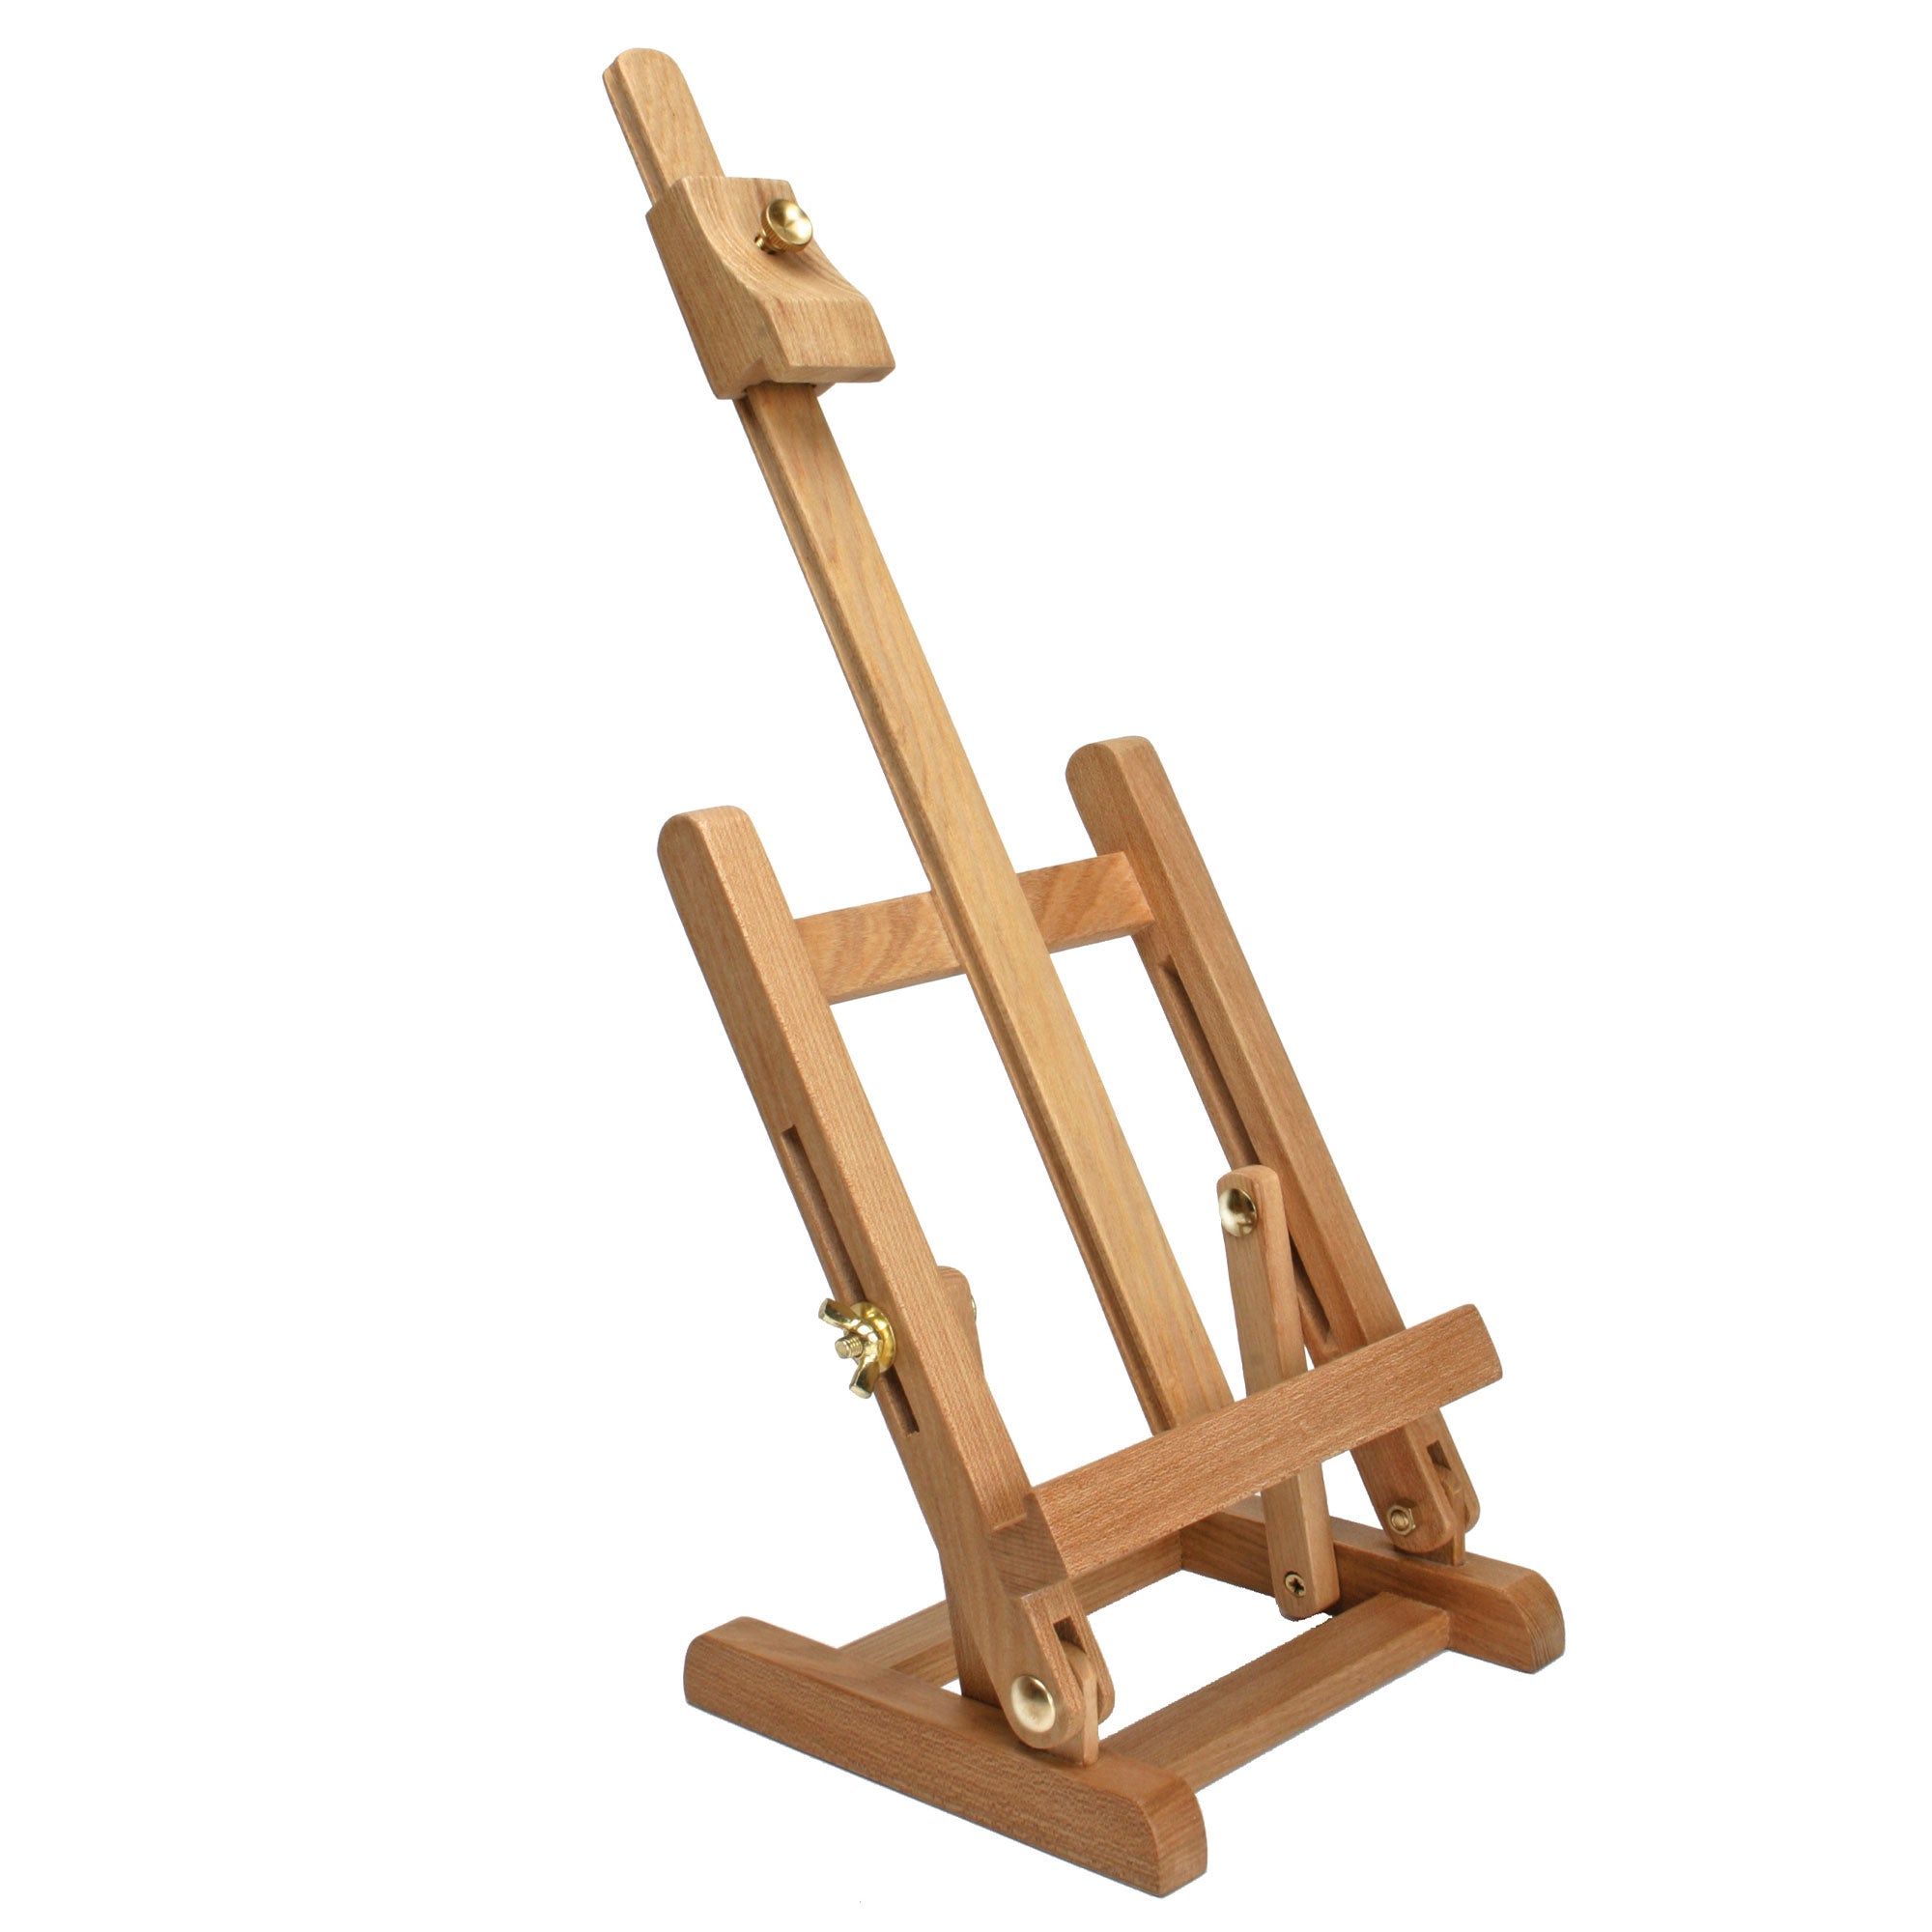 Daler-Rowney Simply - Mini Wooden Table Easel